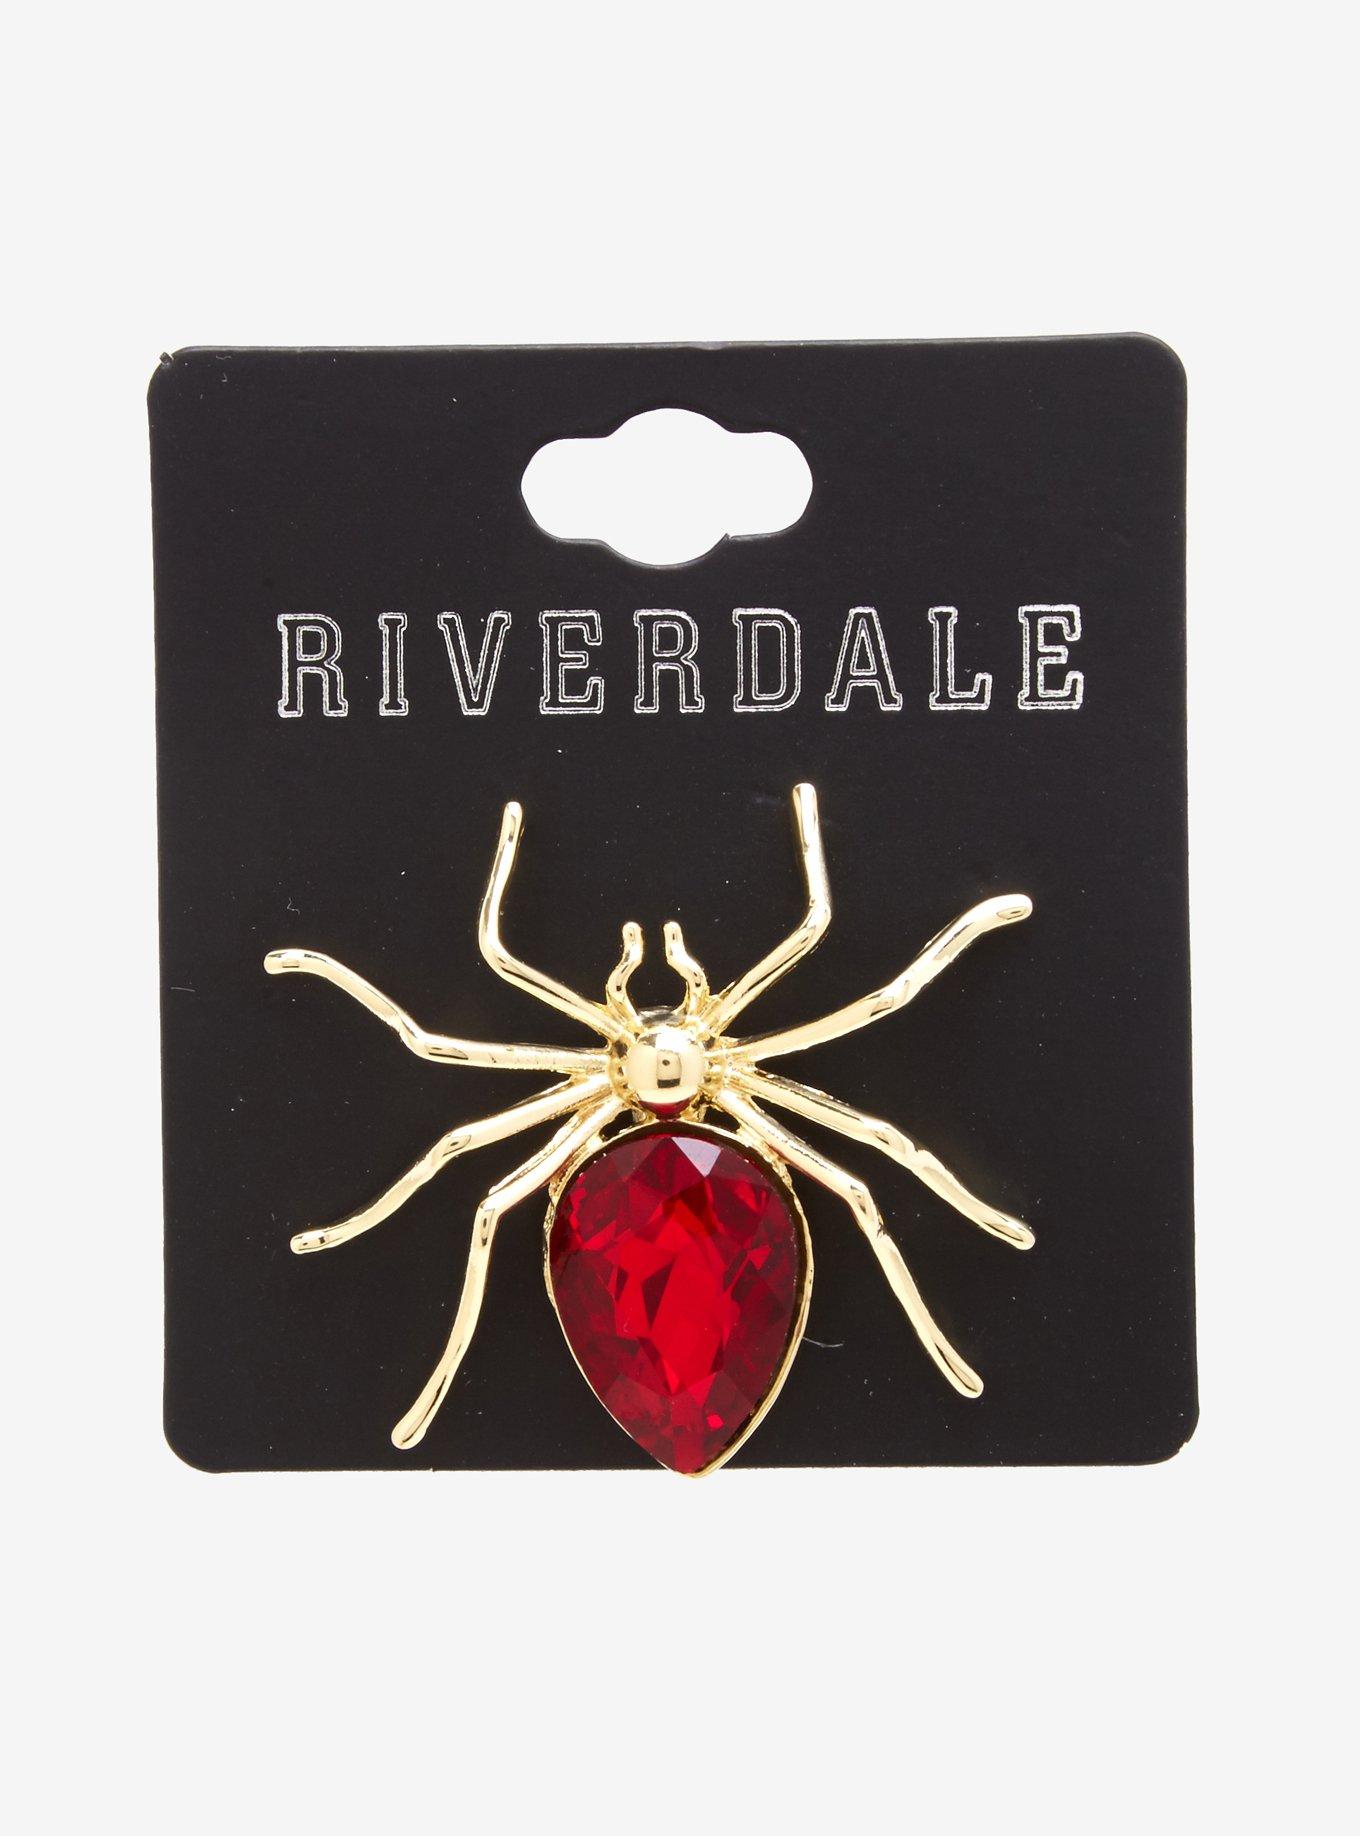 Riverdale Cheryl Blossom Spider Brooch Hot Topic Exclusive